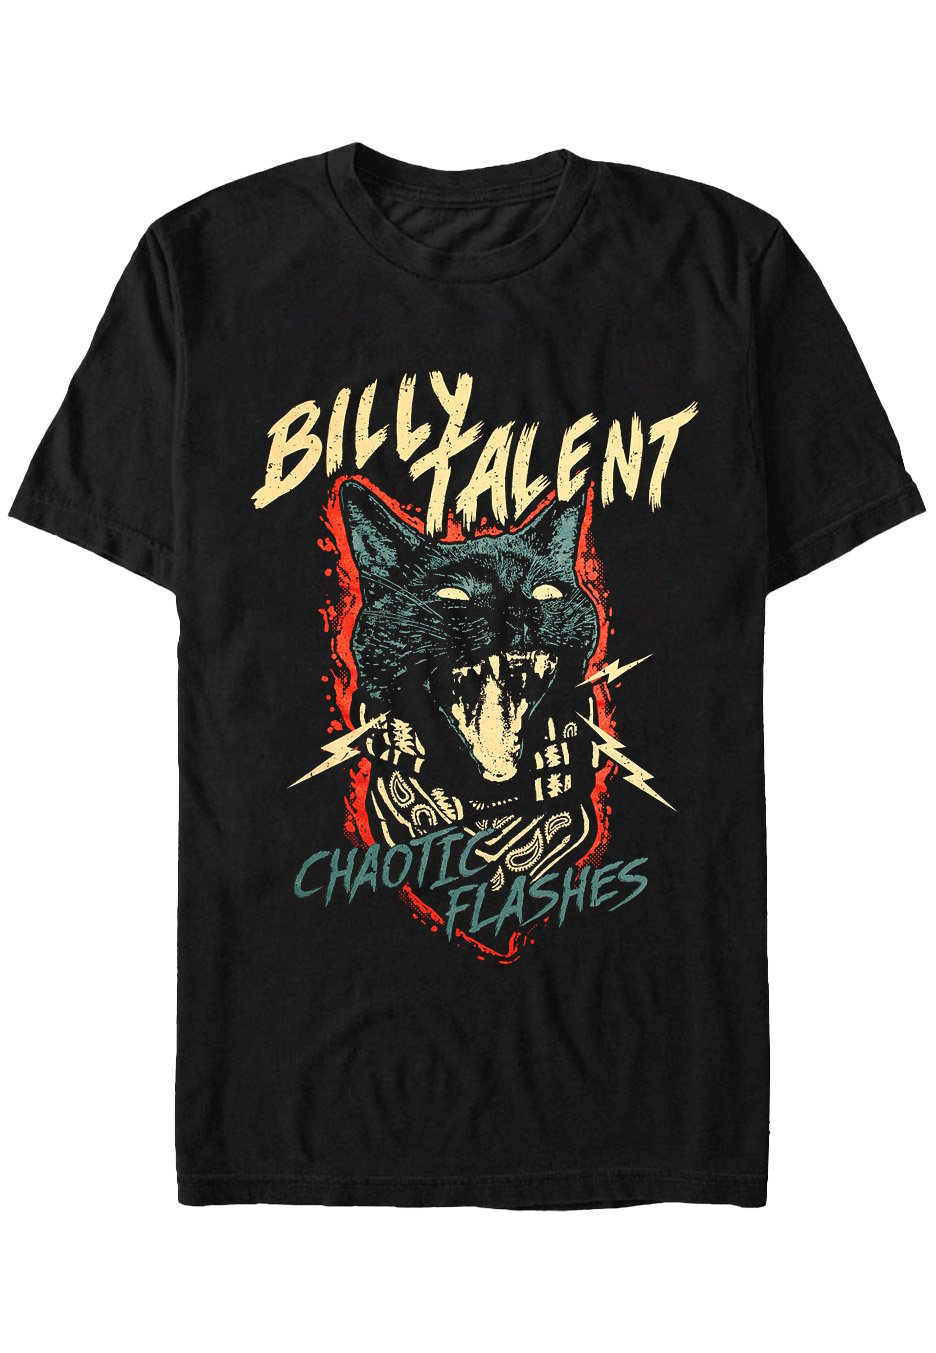 Billy Talent - Chaotic Flashes - T-Shirt | Neutral-Image